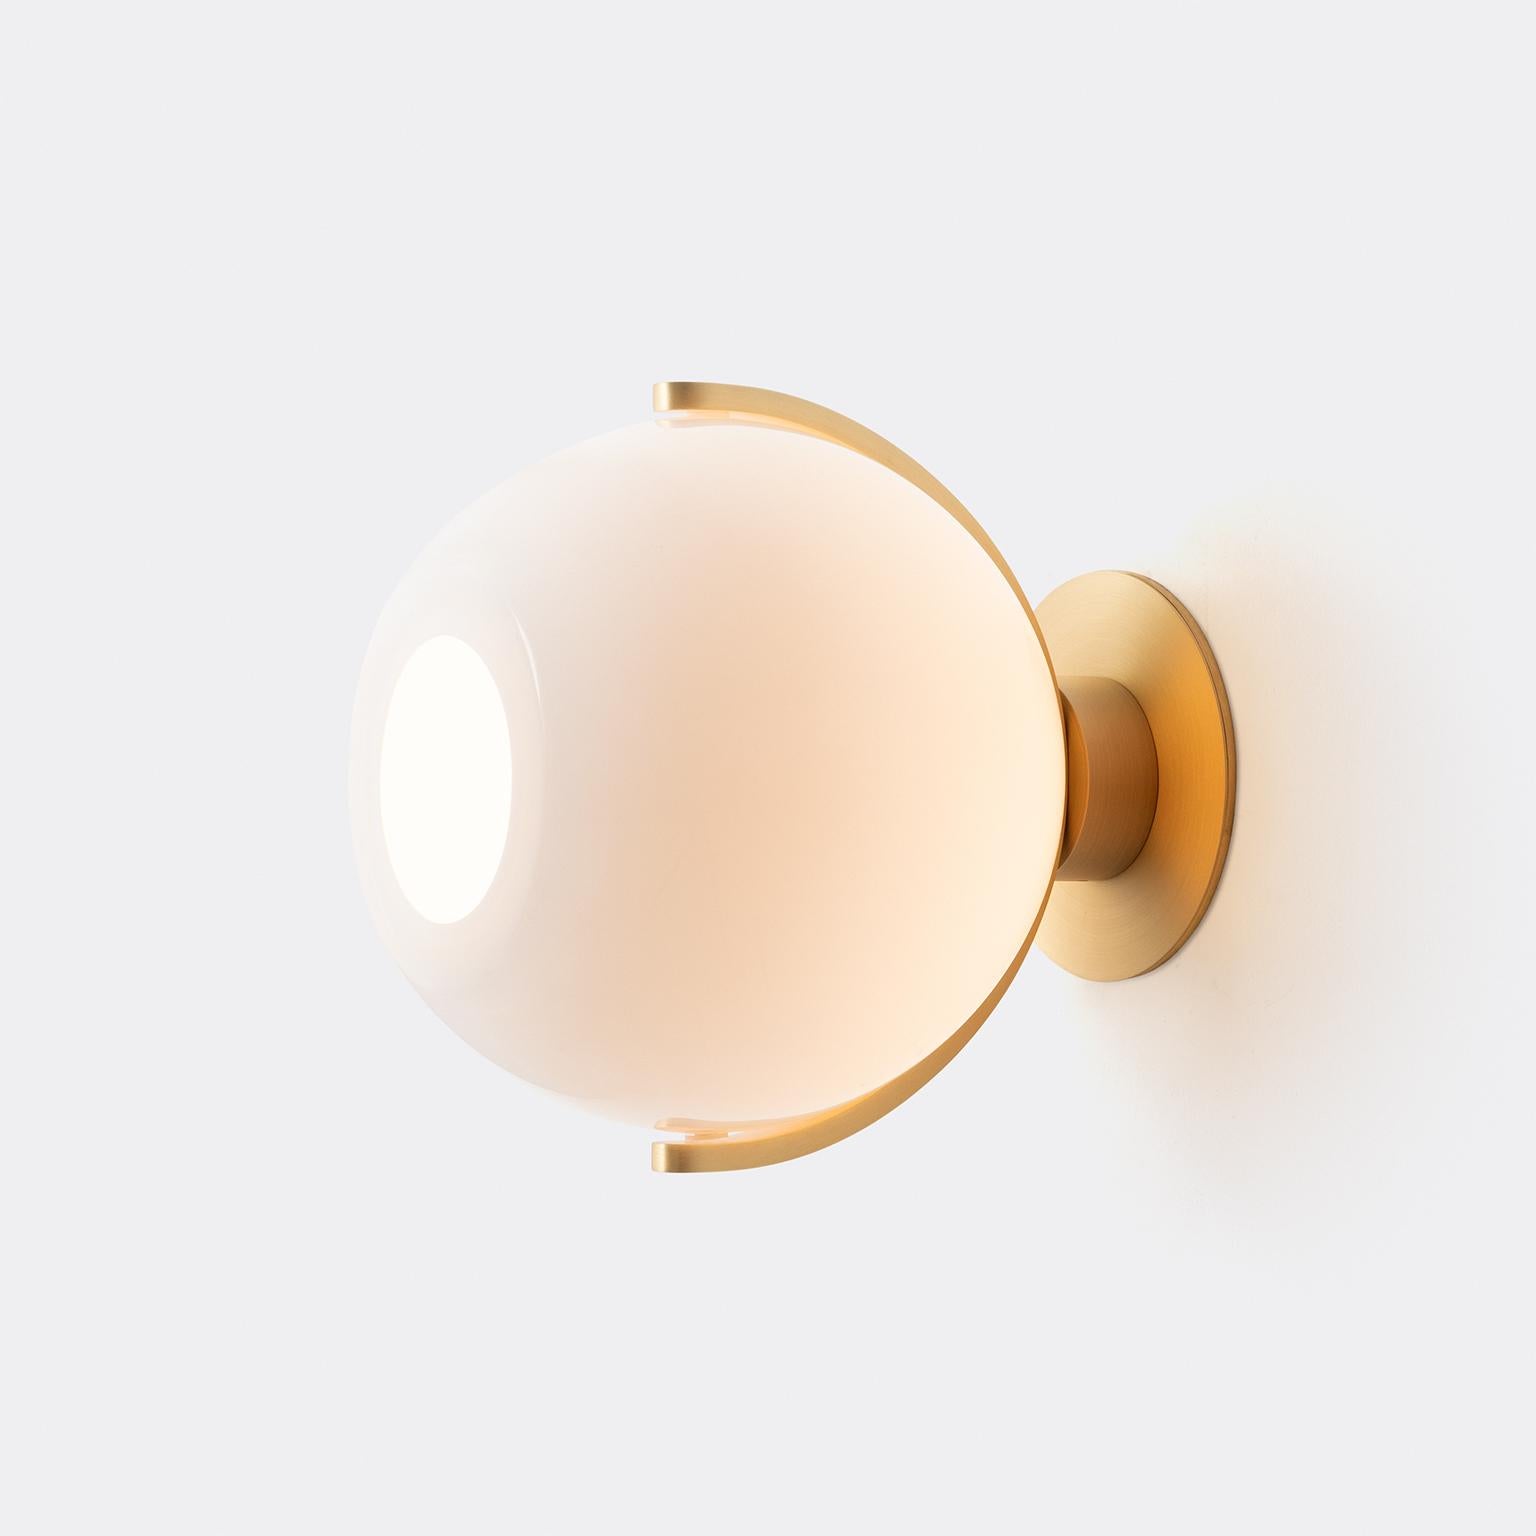 Holly Hunt HH2051646 Another Day sconce with brass by Damien Langlois-Meurinne

Additional Information:
Materials: Brass, glass
Frame finish: Satin varnished brushed brass
Glass finish: White glass
Diffuser: Glass
Illumination: Socket base,